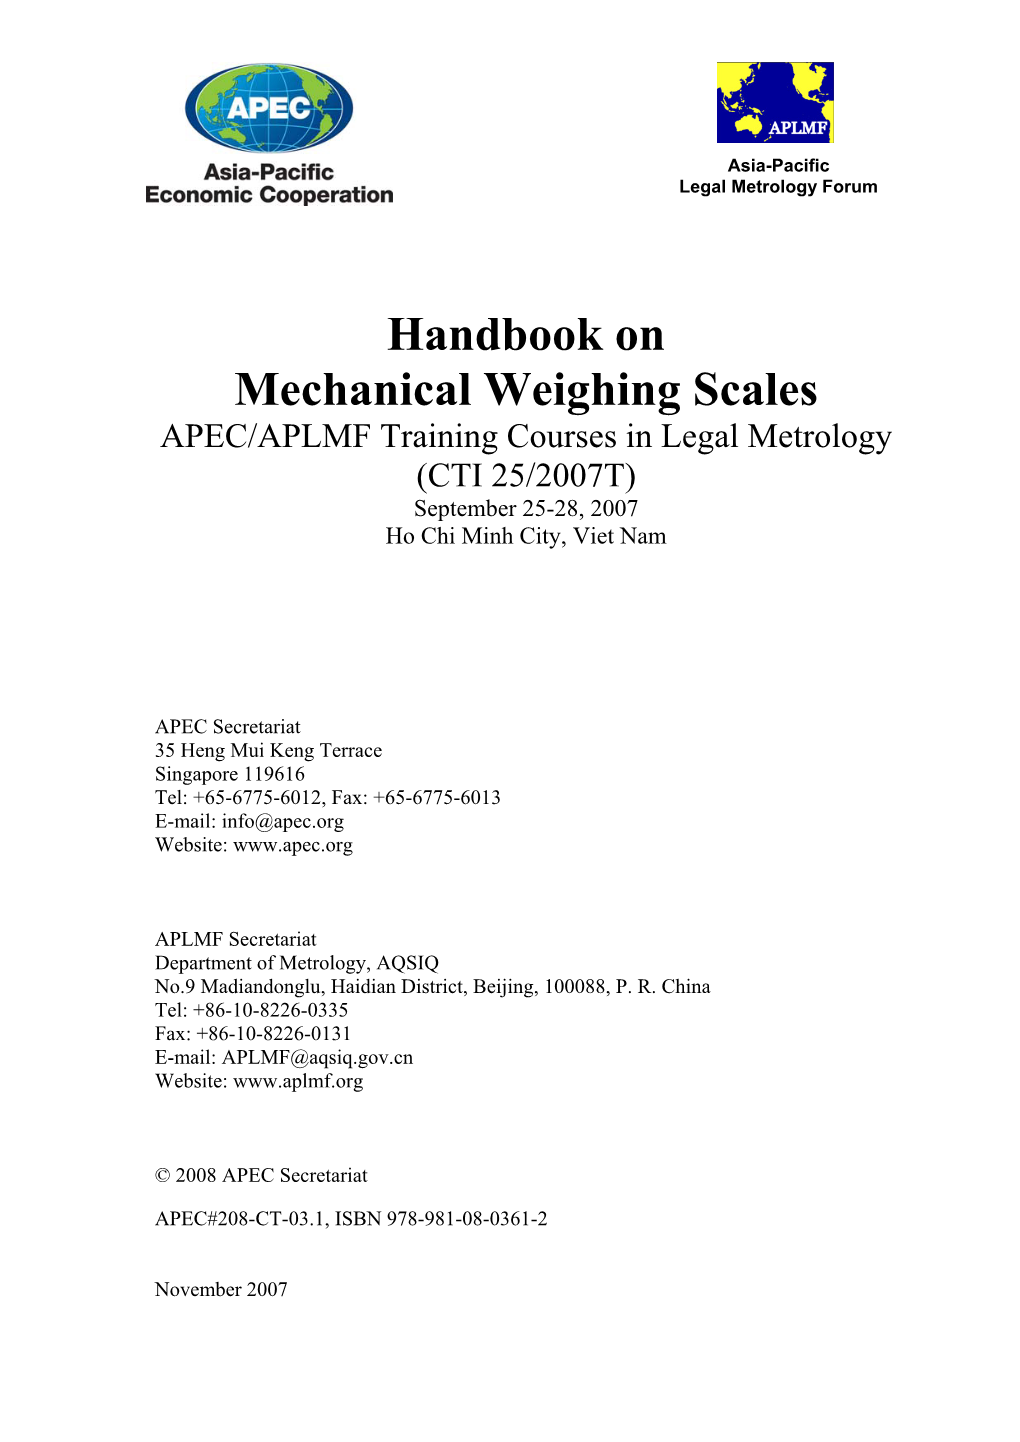 Handbook on Mechanical Weighing Scales APEC/APLMF Training Courses in Legal Metrology (CTI 25/2007T) September 25-28, 2007 Ho Chi Minh City, Viet Nam